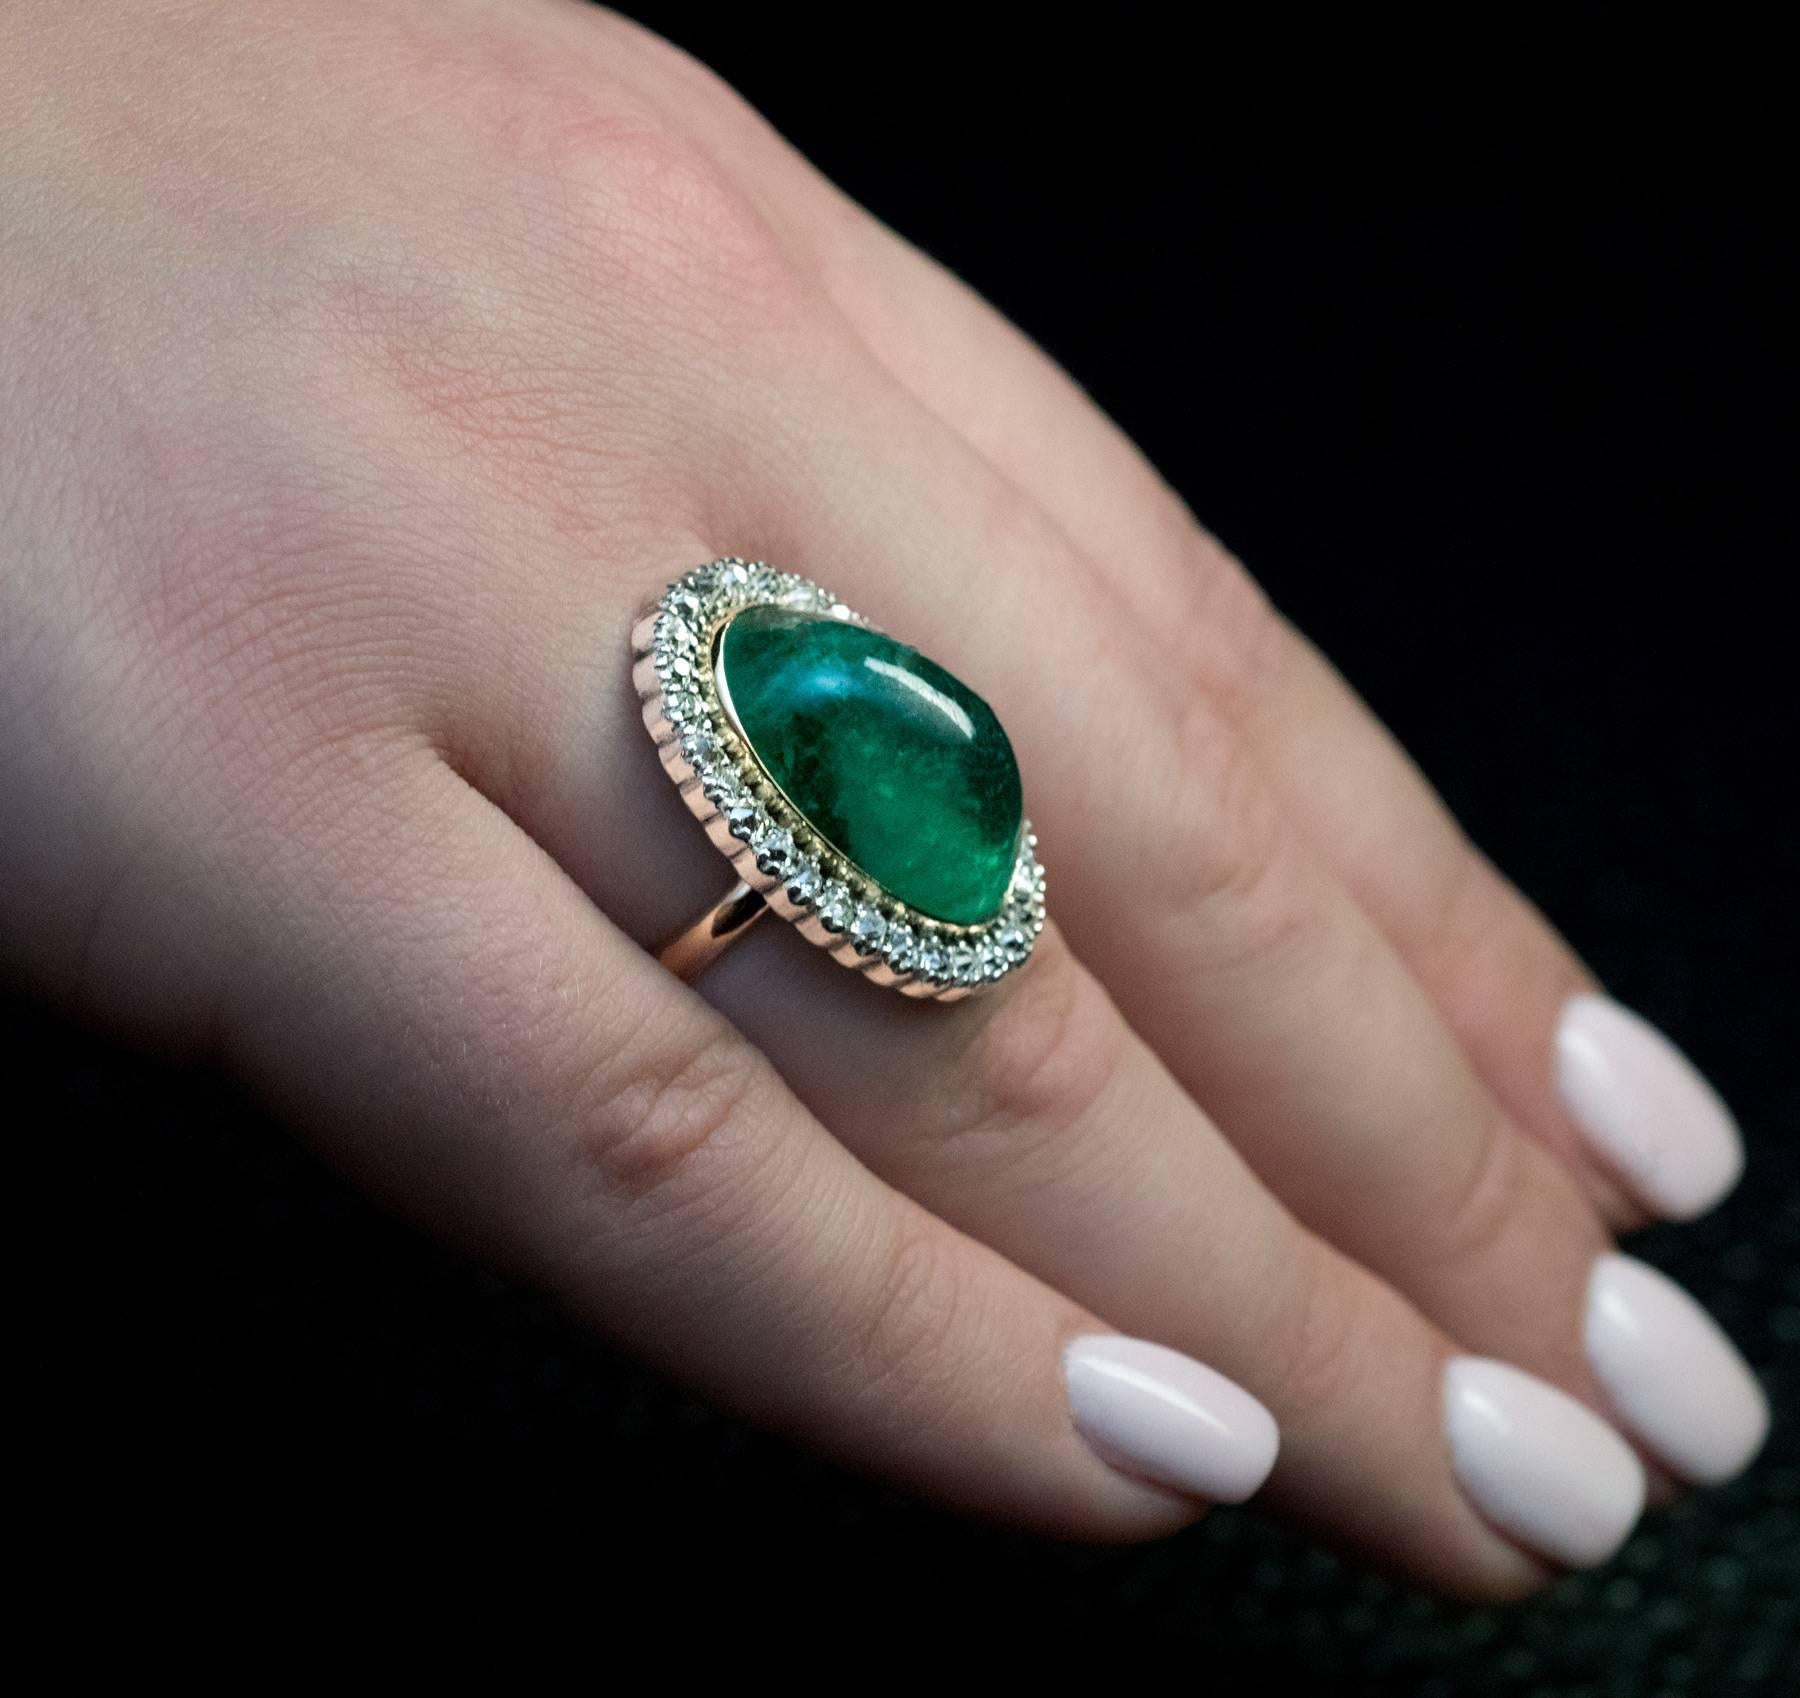 early 1900s
This antique 14K gold and silver ring features a cabochon cut emerald (measuring 21.2 x 13 x 9.25 mm) of a nice bluish green color. The emerald is framed by old cushion cut diamonds (H-I color, SI clarity) set in silver over gold.